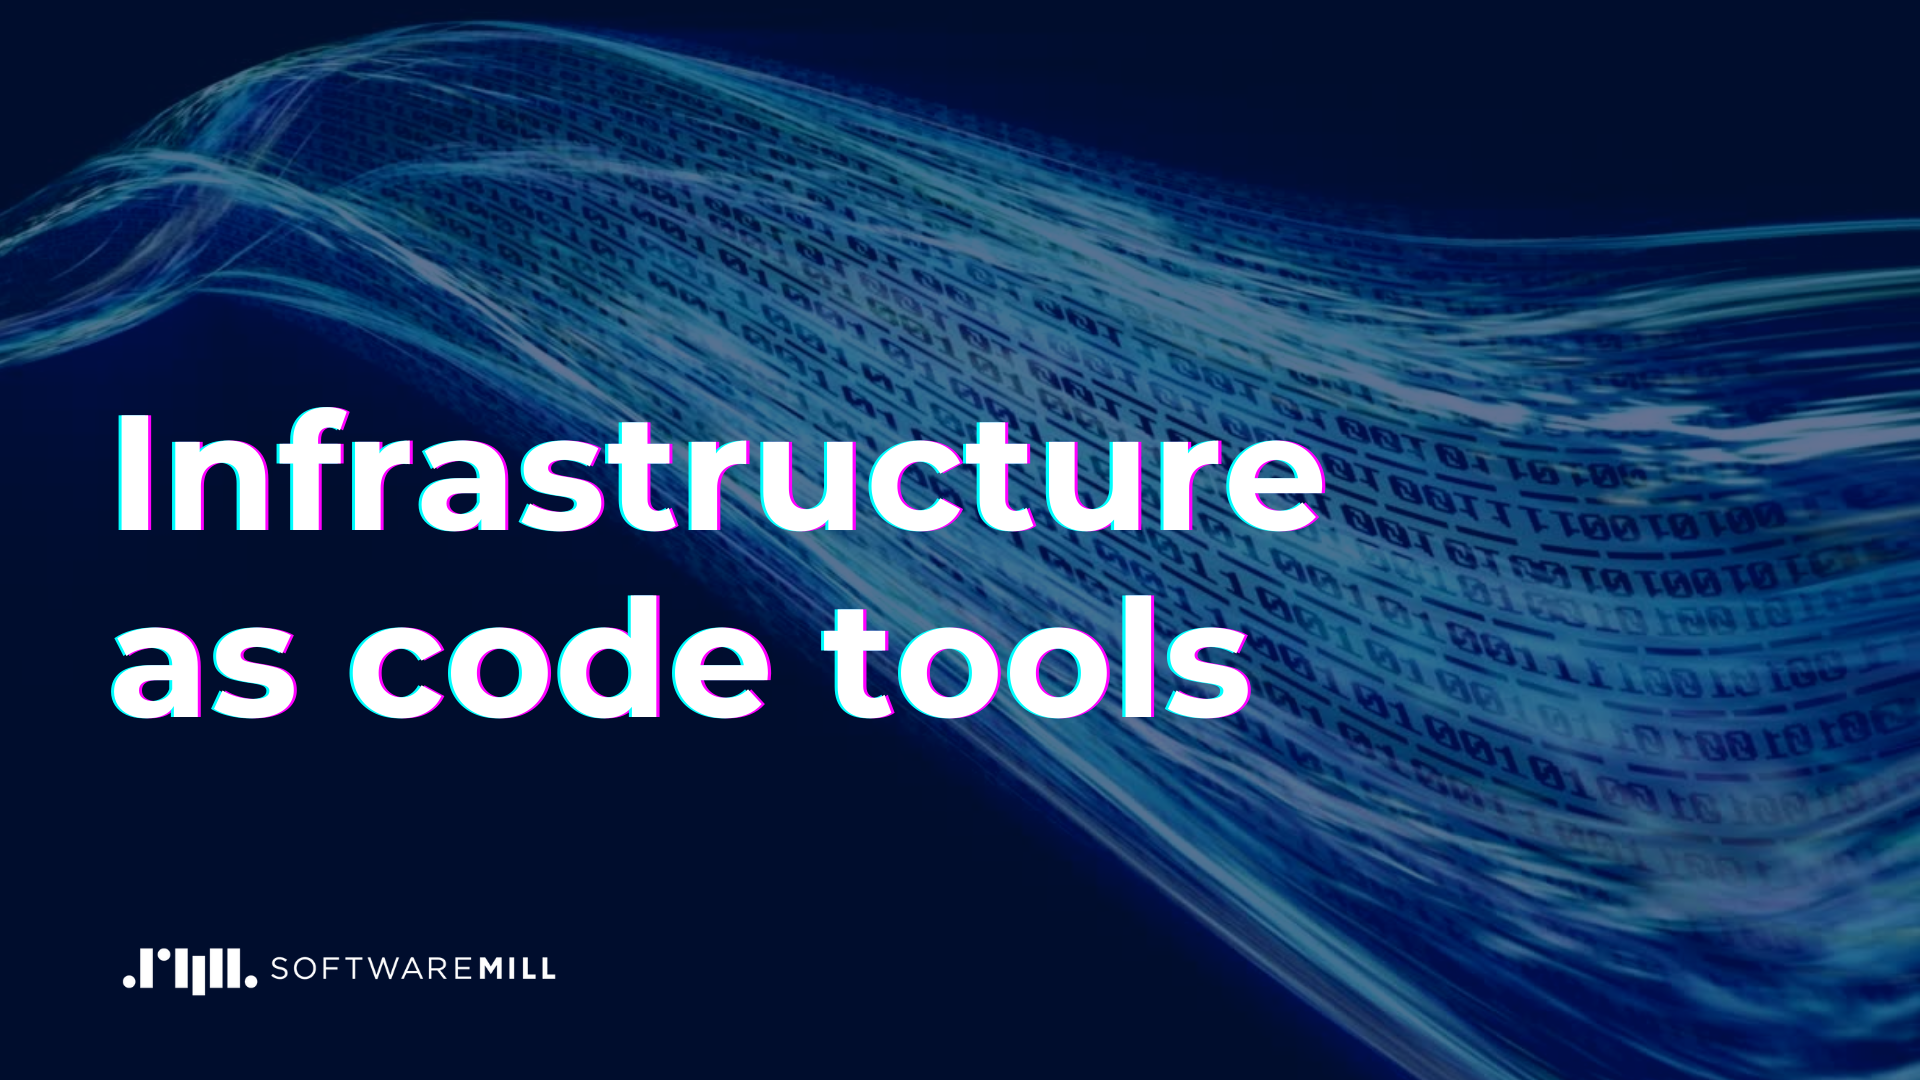 Infrastructure as code tools webp image